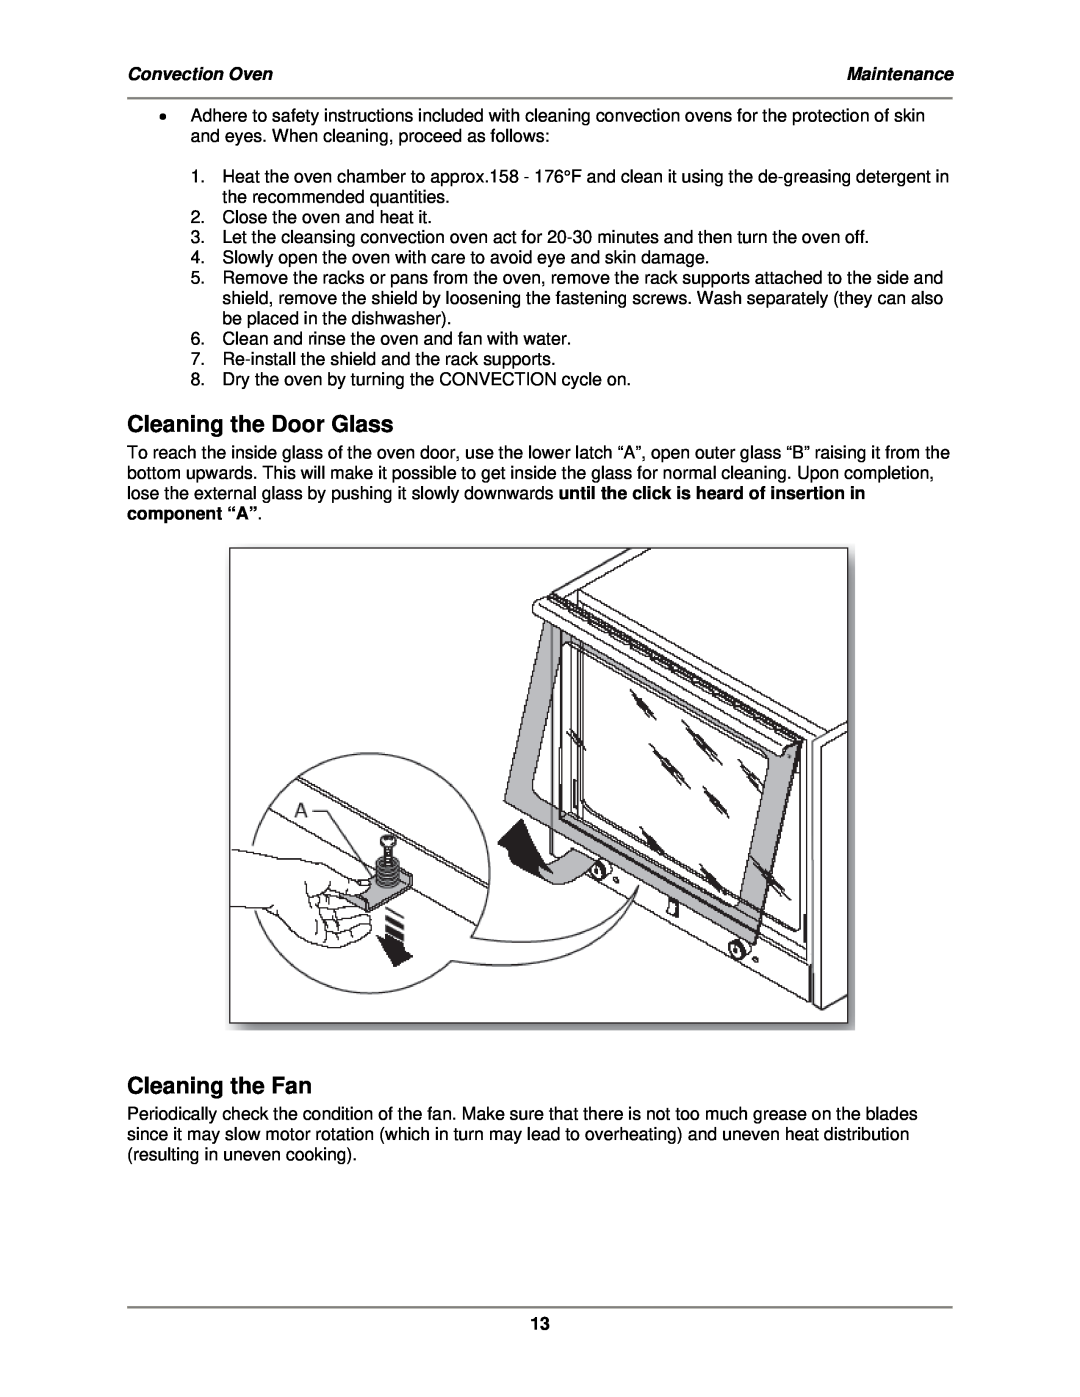 Bakers Pride Oven MT-200 service manual Cleaning the Door Glass, Cleaning the Fan, Convection Oven, Maintenance 